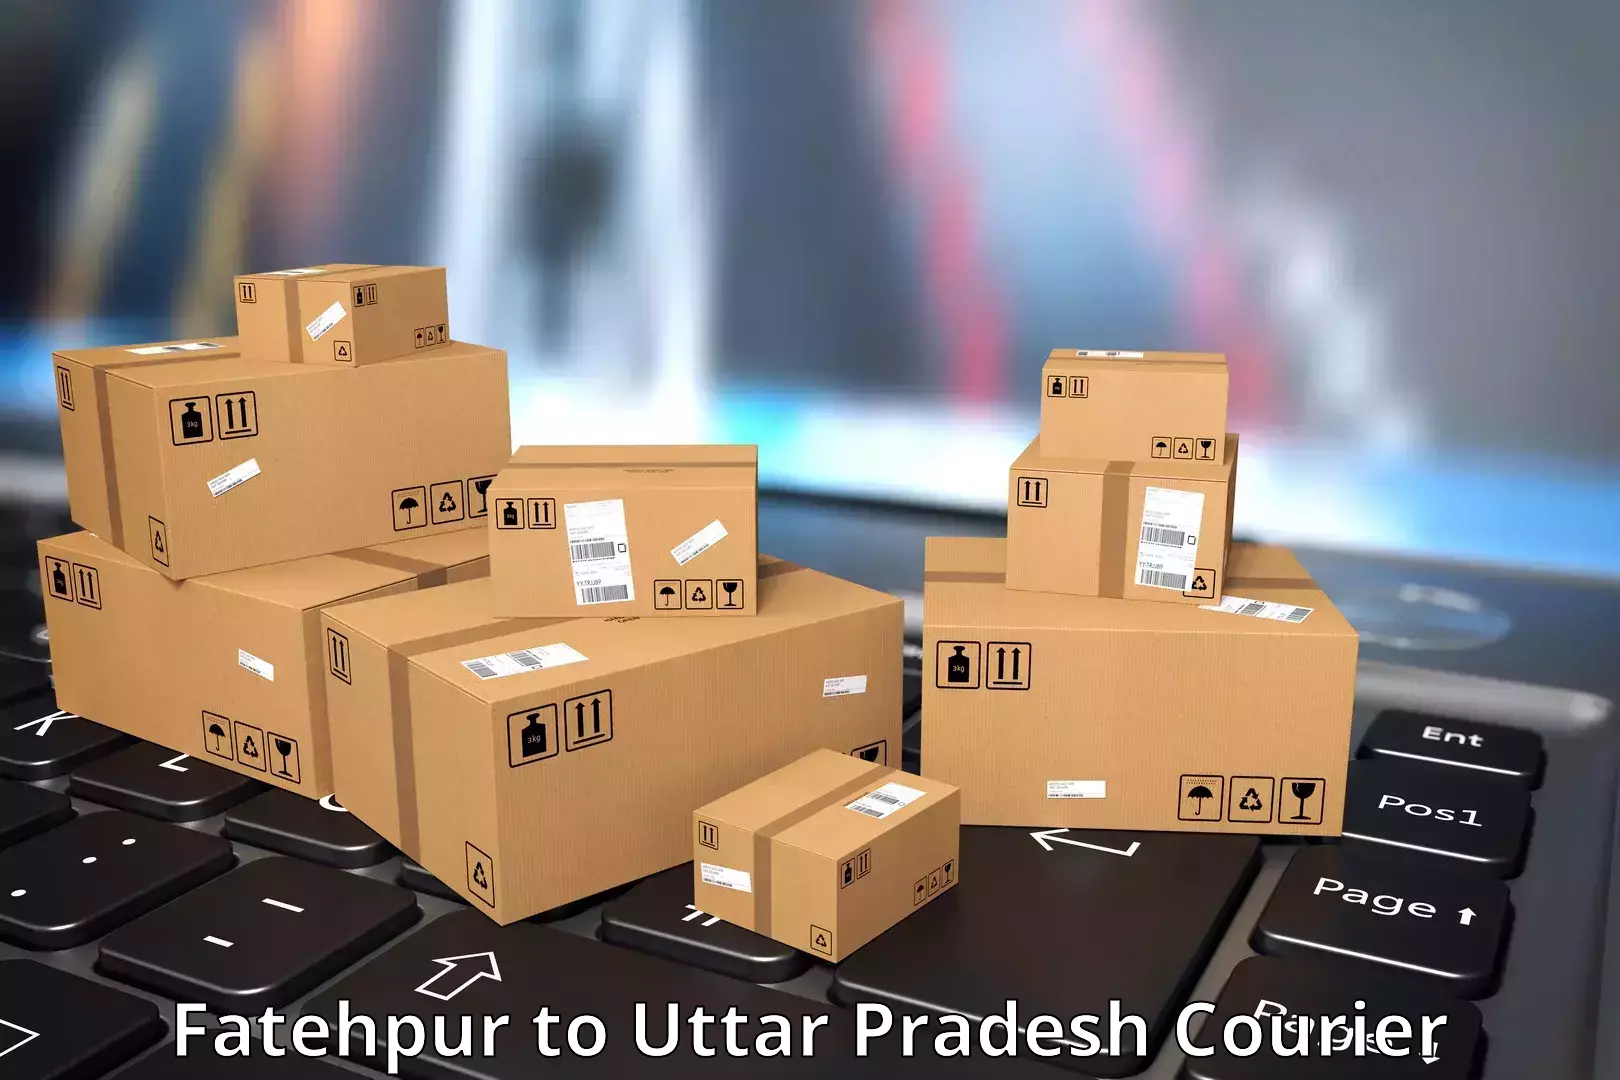 Multi-service courier options Fatehpur to Kanpur